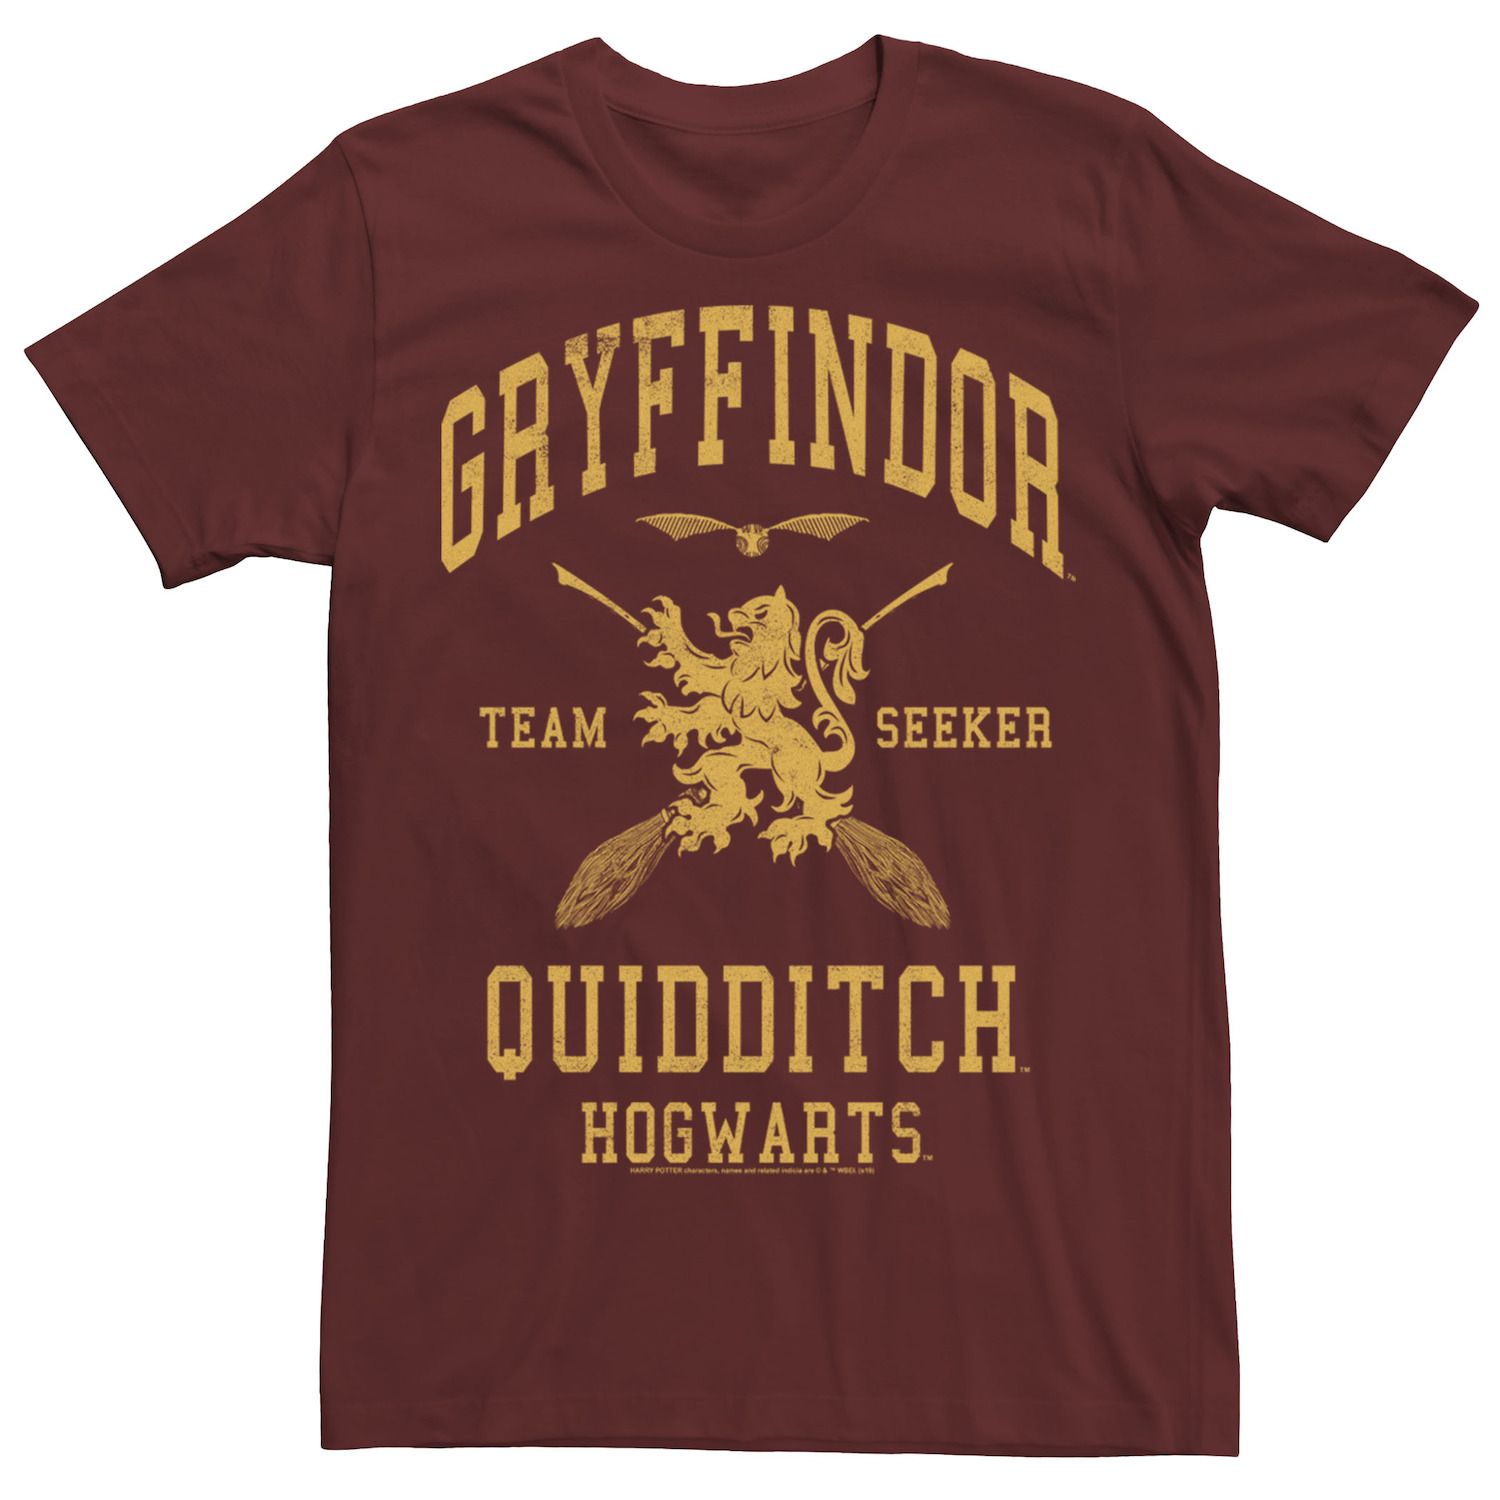 Image for Harry Potter Men's Deathly Hallows Gryffindor Team Seeker Jersey Tee at Kohl's.